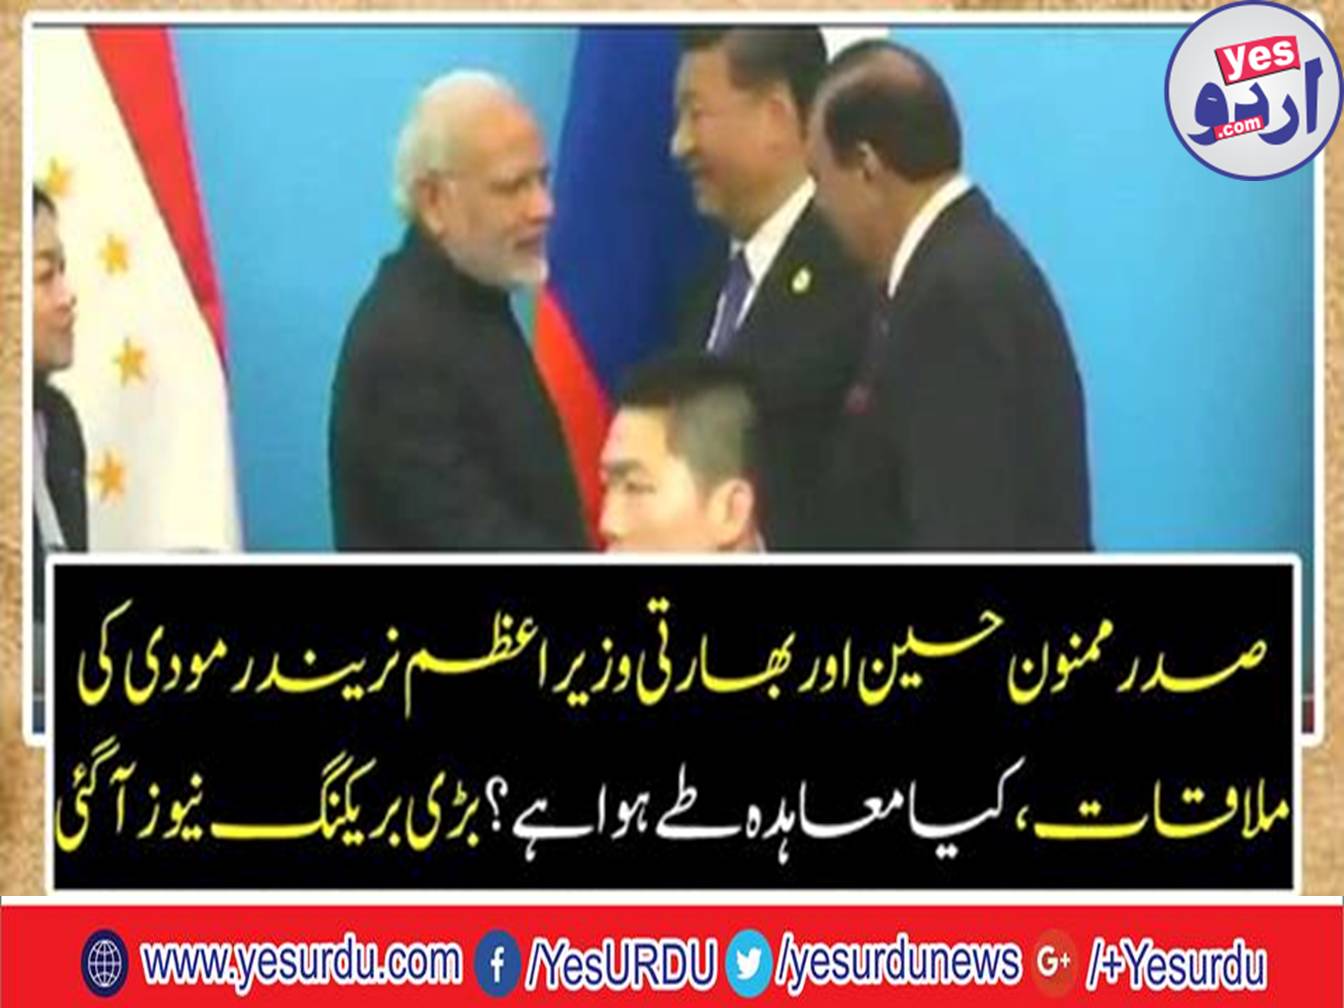 President Mamnoon Hussein and Indian Prime Minister Narendra Modi met